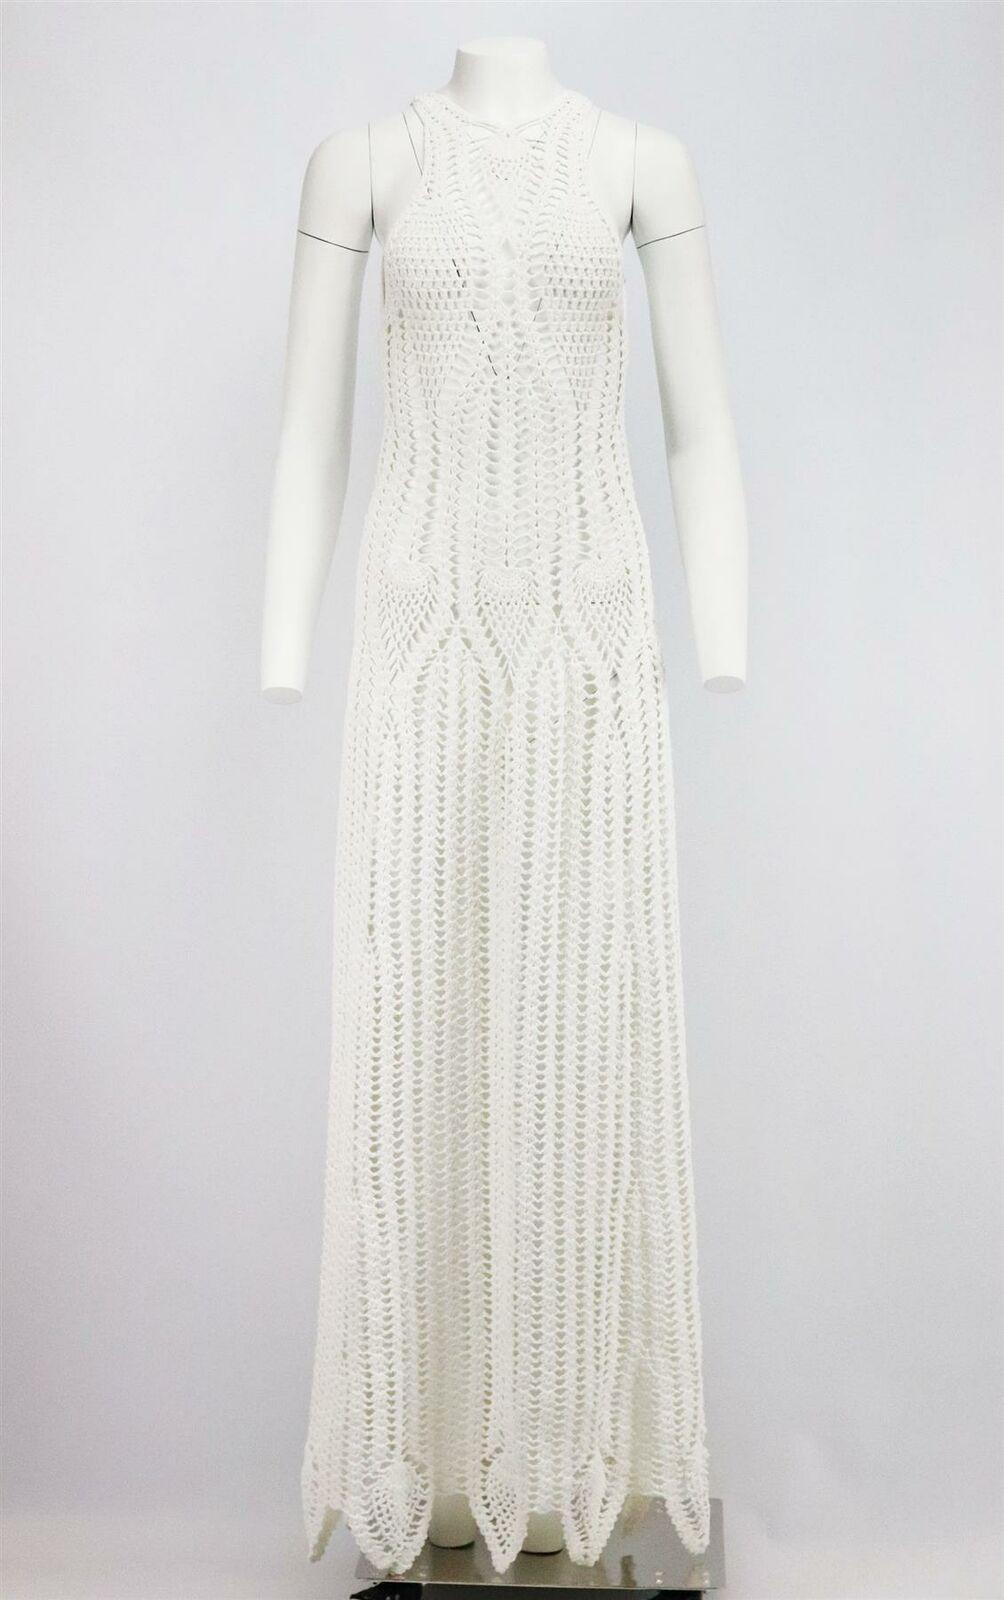 This dress by Rosetta Getty is hand-crocheted from glossy cotton-blend and includes a slip for coverage, this floor-length style is perfect for a summer evening or by the beach.
Ivory crocheted cotton-blend.
Concealed zip fastening at back.
69%